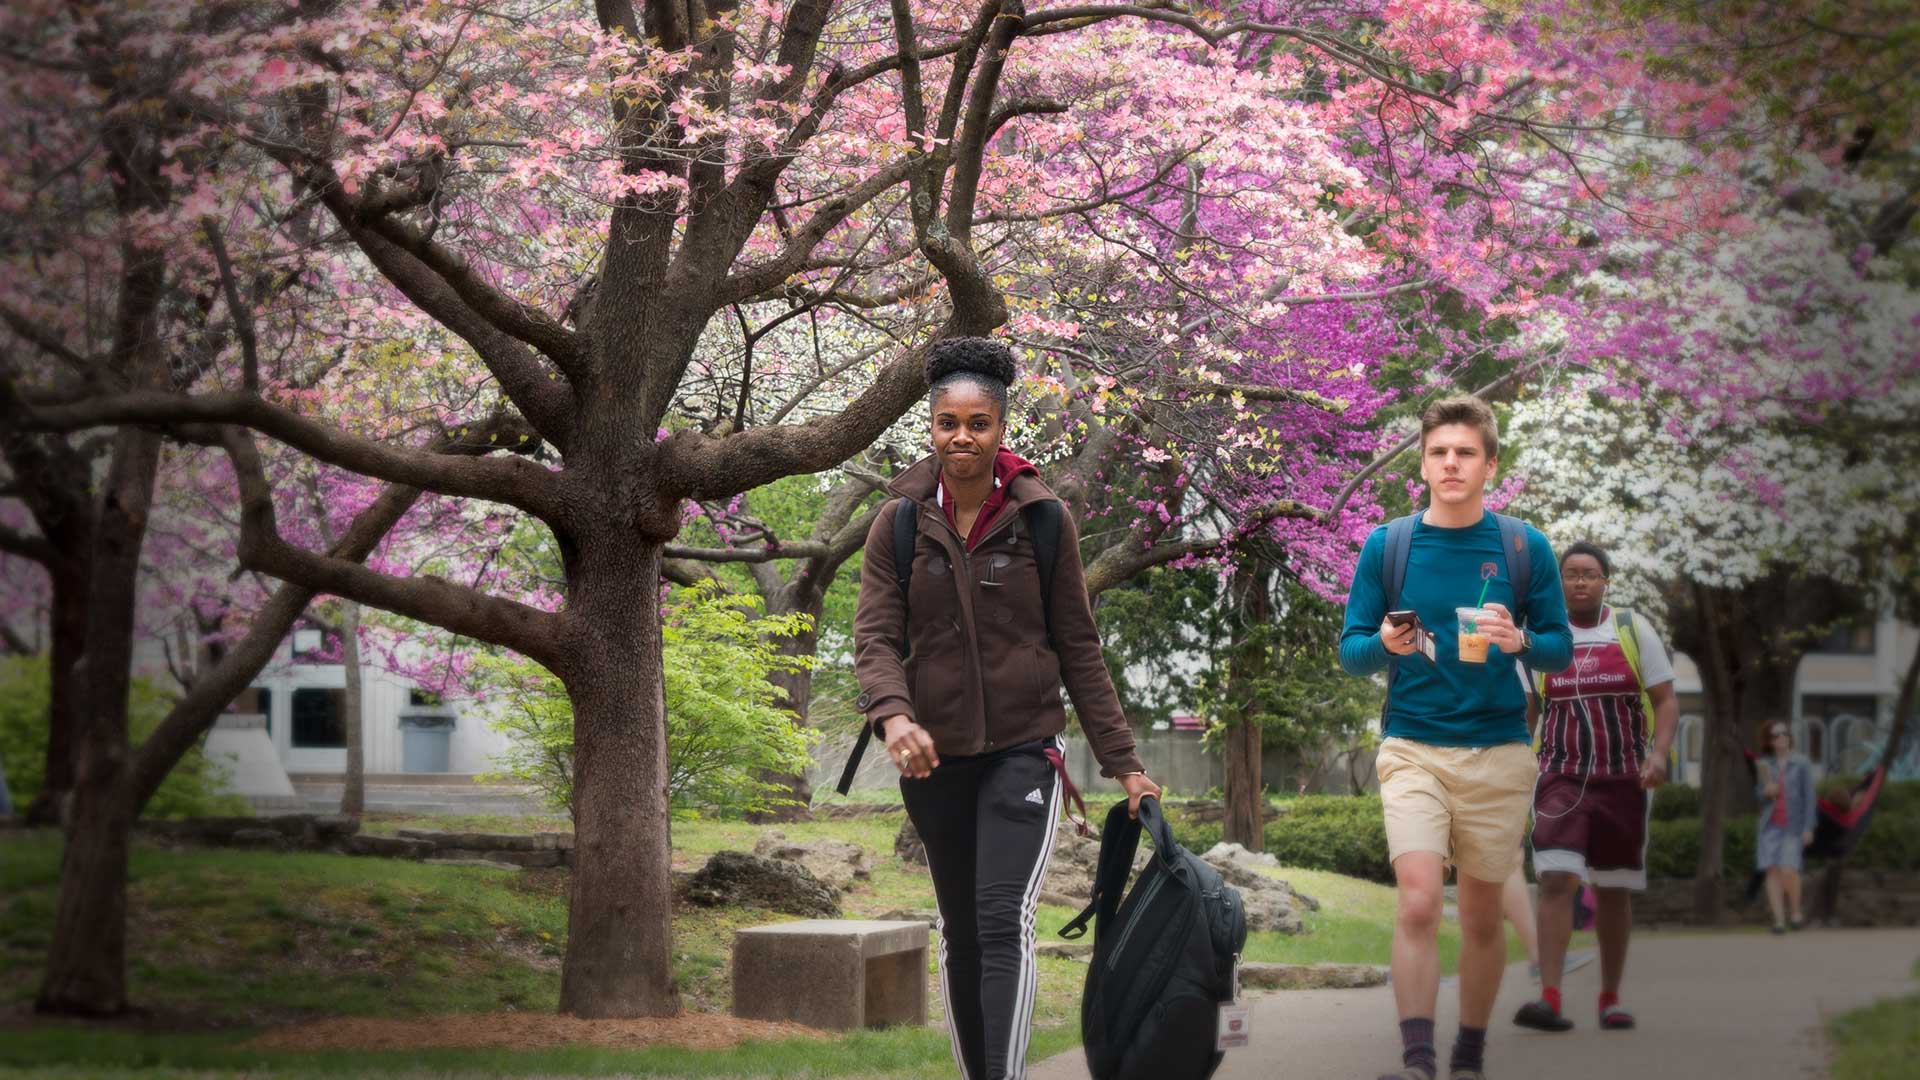 Students walking on campus on a spring day with trees in full bloom.